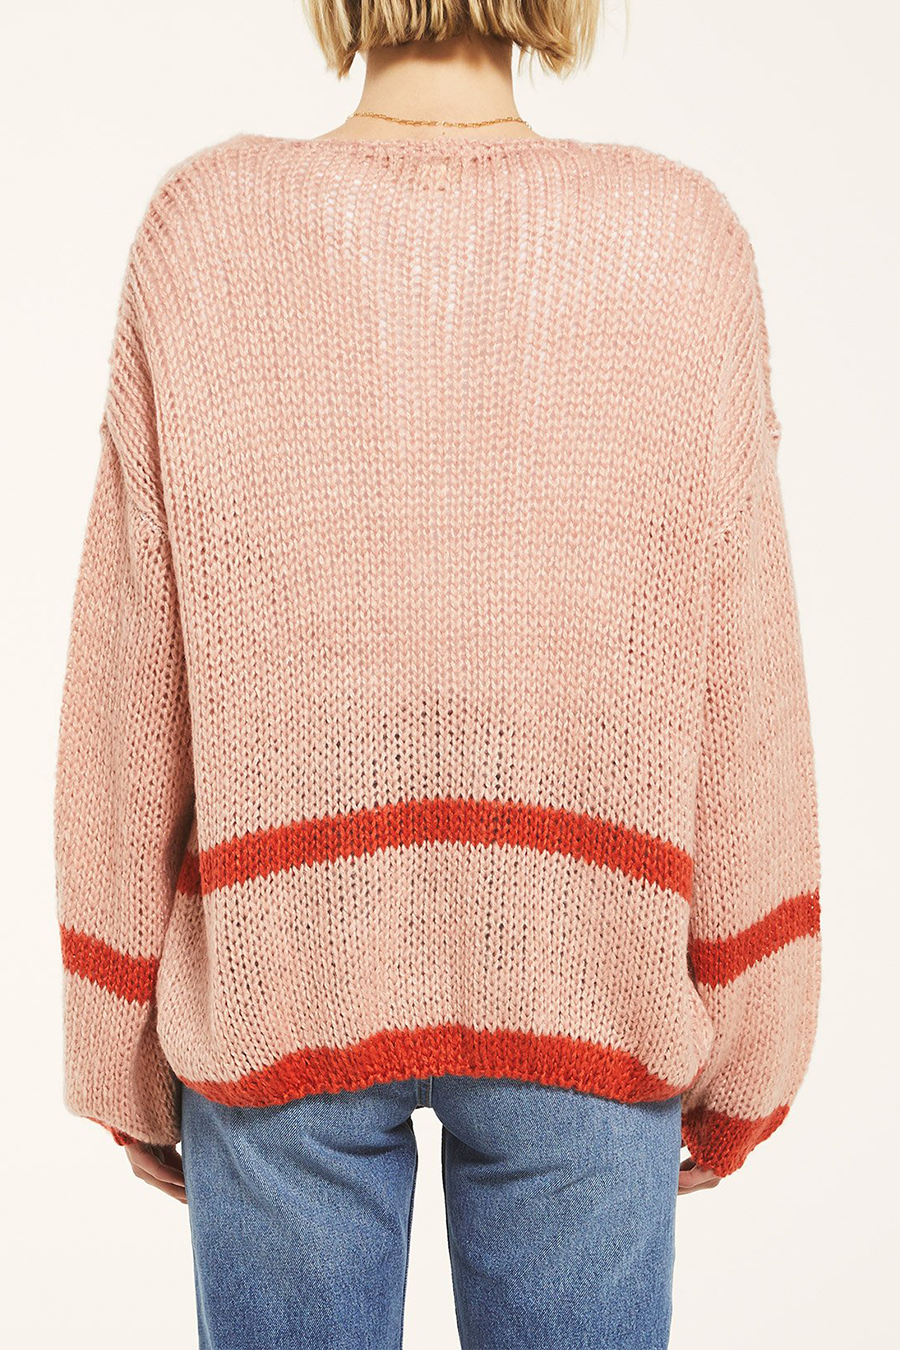 Regents Sweater | Pale Pink - Main Image Number 3 of 3